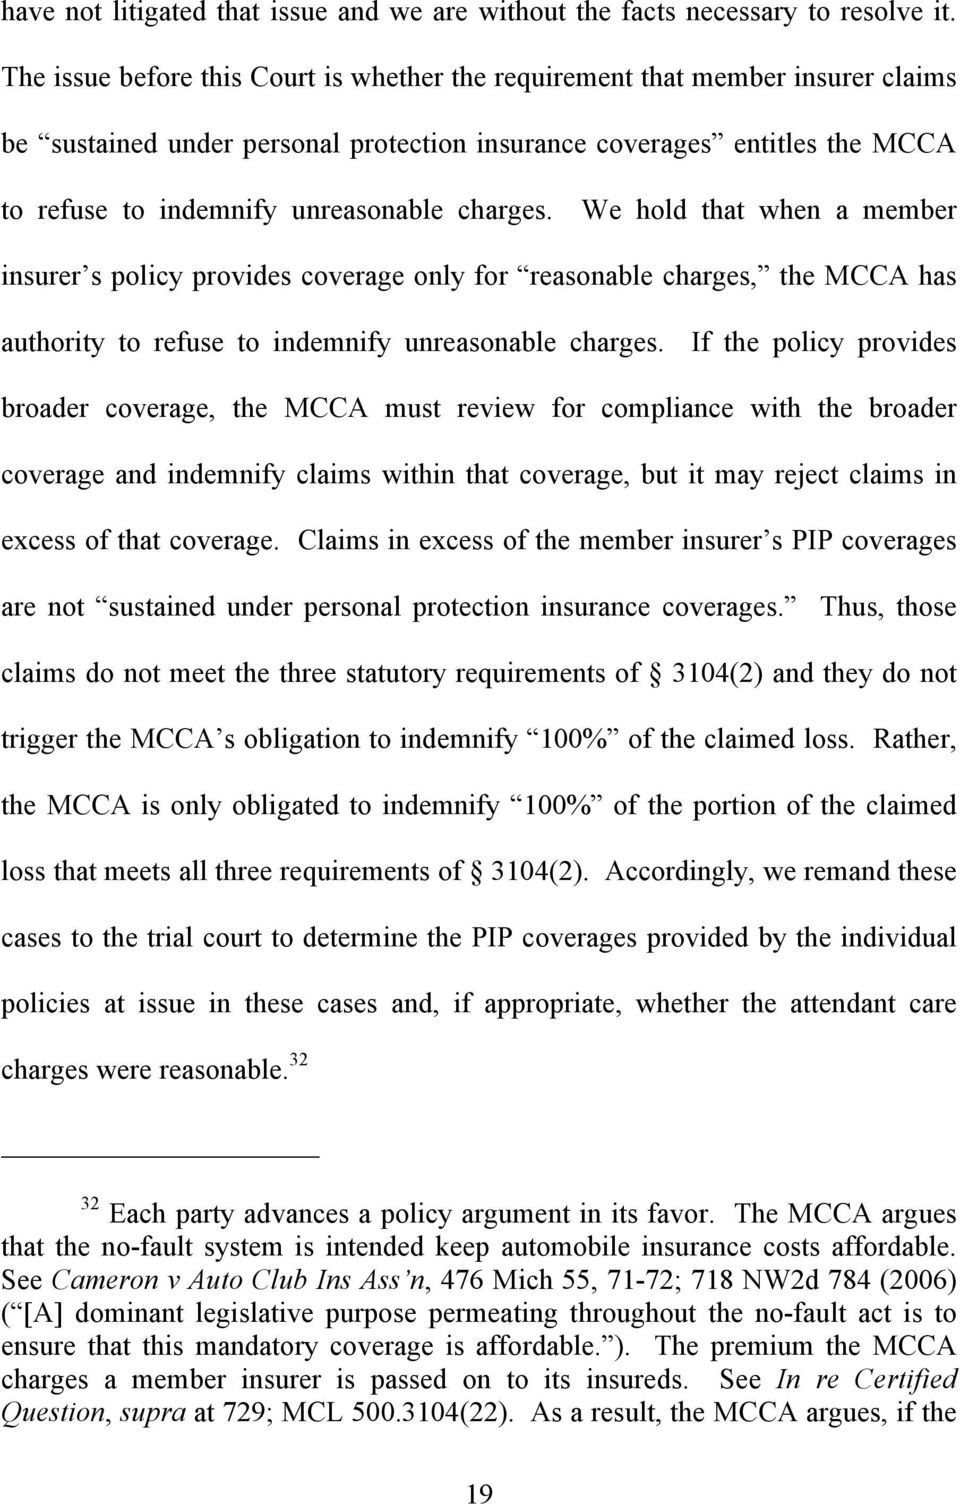 charges. We hold that when a member insurer s policy provides coverage only for reasonable charges, the MCCA has authority to refuse to indemnify unreasonable charges.